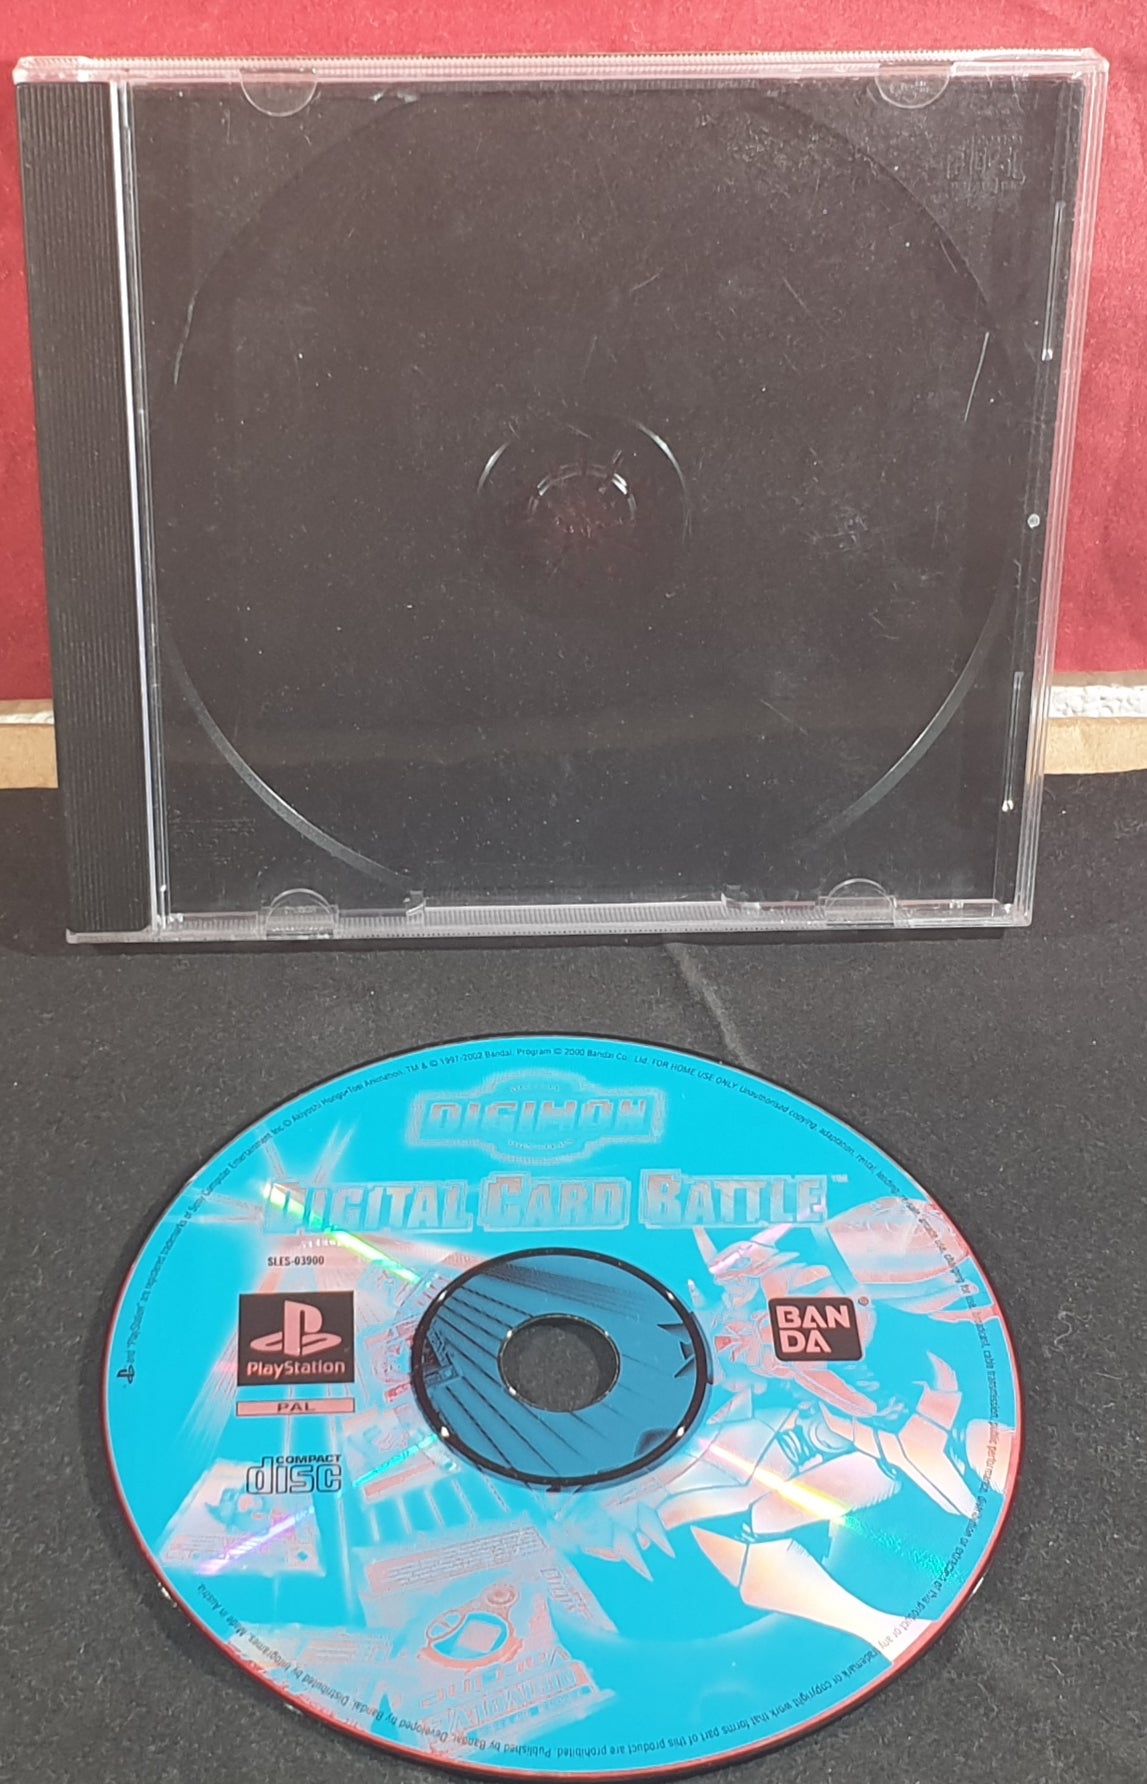 Digimon Digital Card Battle Disc Only Sony Playstation 1 (PS1) Game